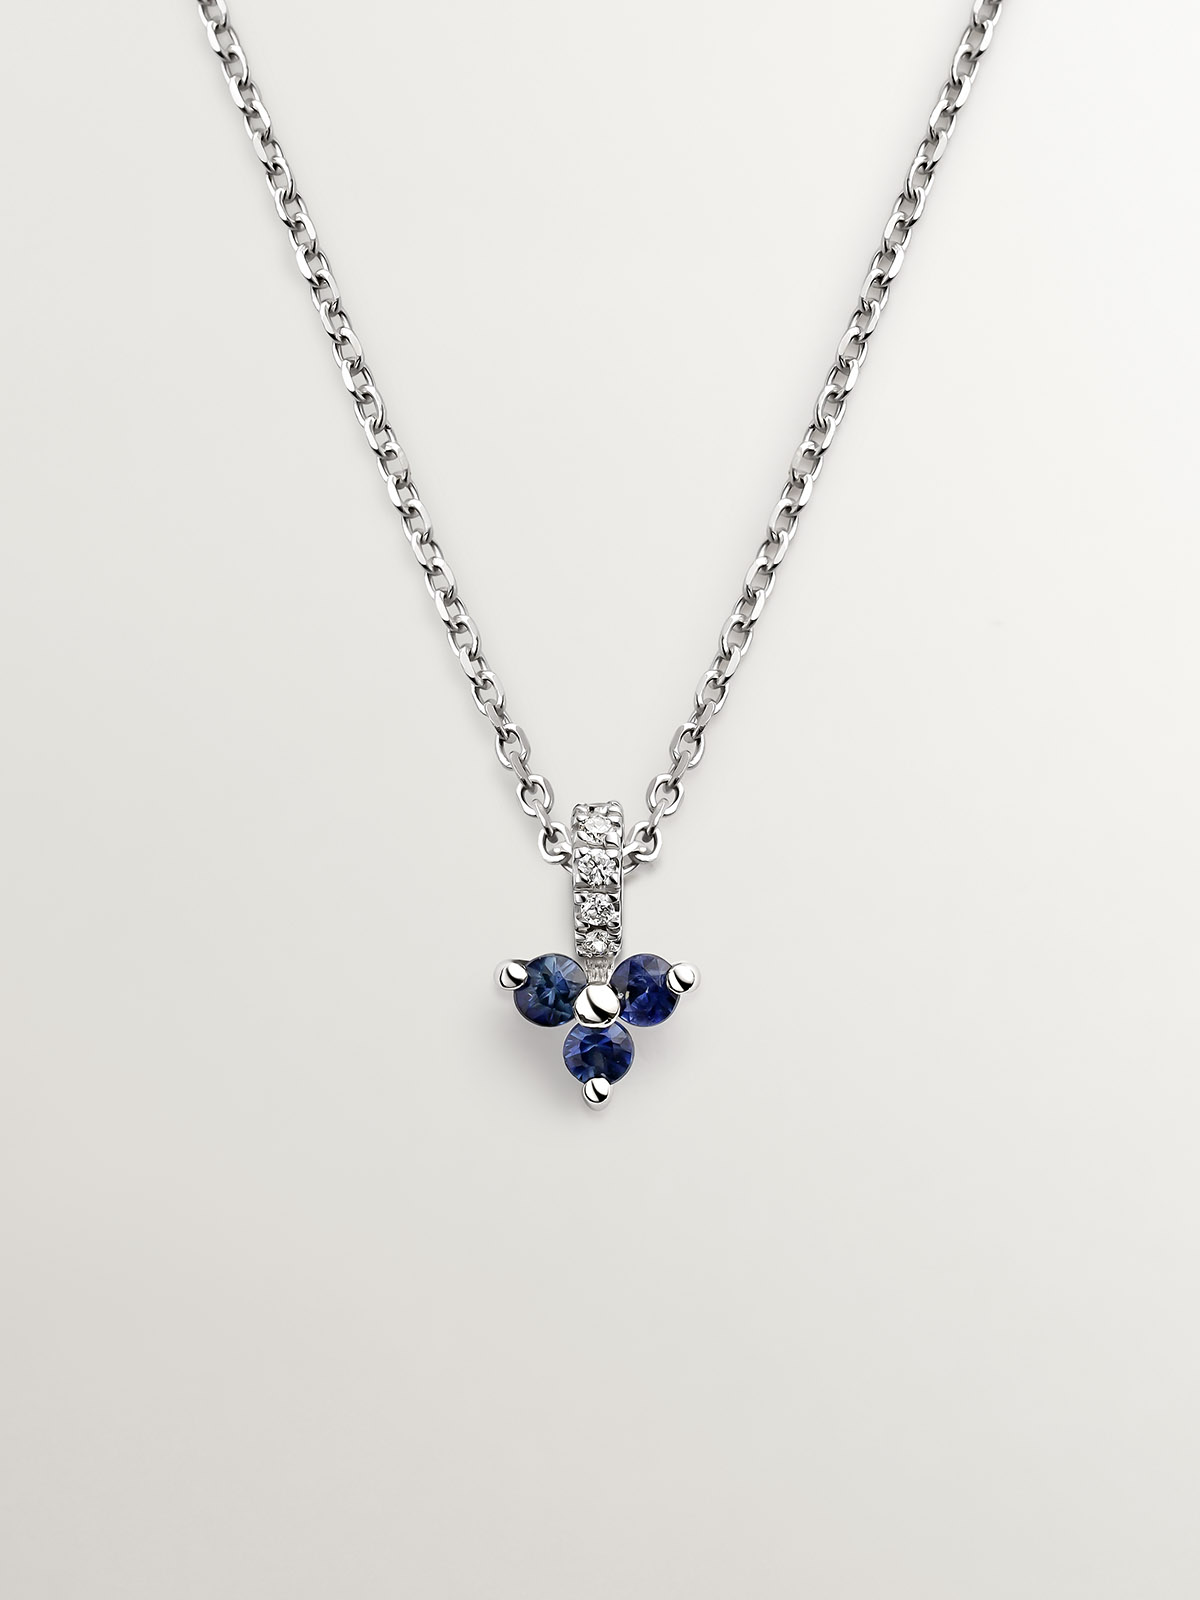 18K white gold pendant with blue sapphires and diamonds.